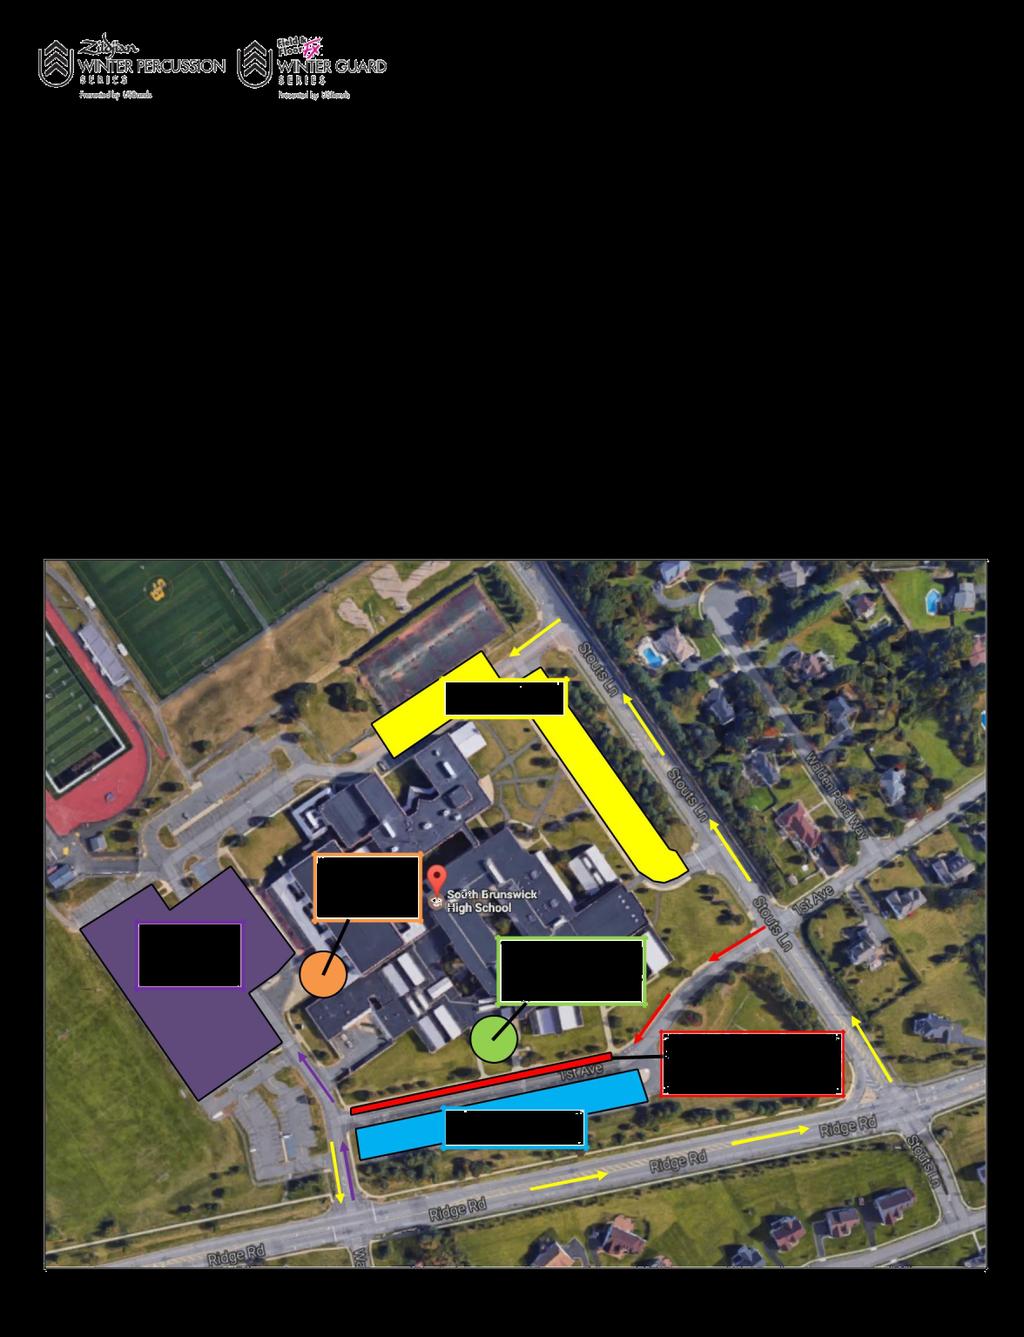 Parking **PLEASE FOLLOW APPROPRIATE SIGNS FOR PARKING AREAS** Upon arriving at South Brunswick High School: -- BUSES/TRUCKS: Turn onto 1st Avenue from Stouts Lane to access the Unloading/Loading Zone.